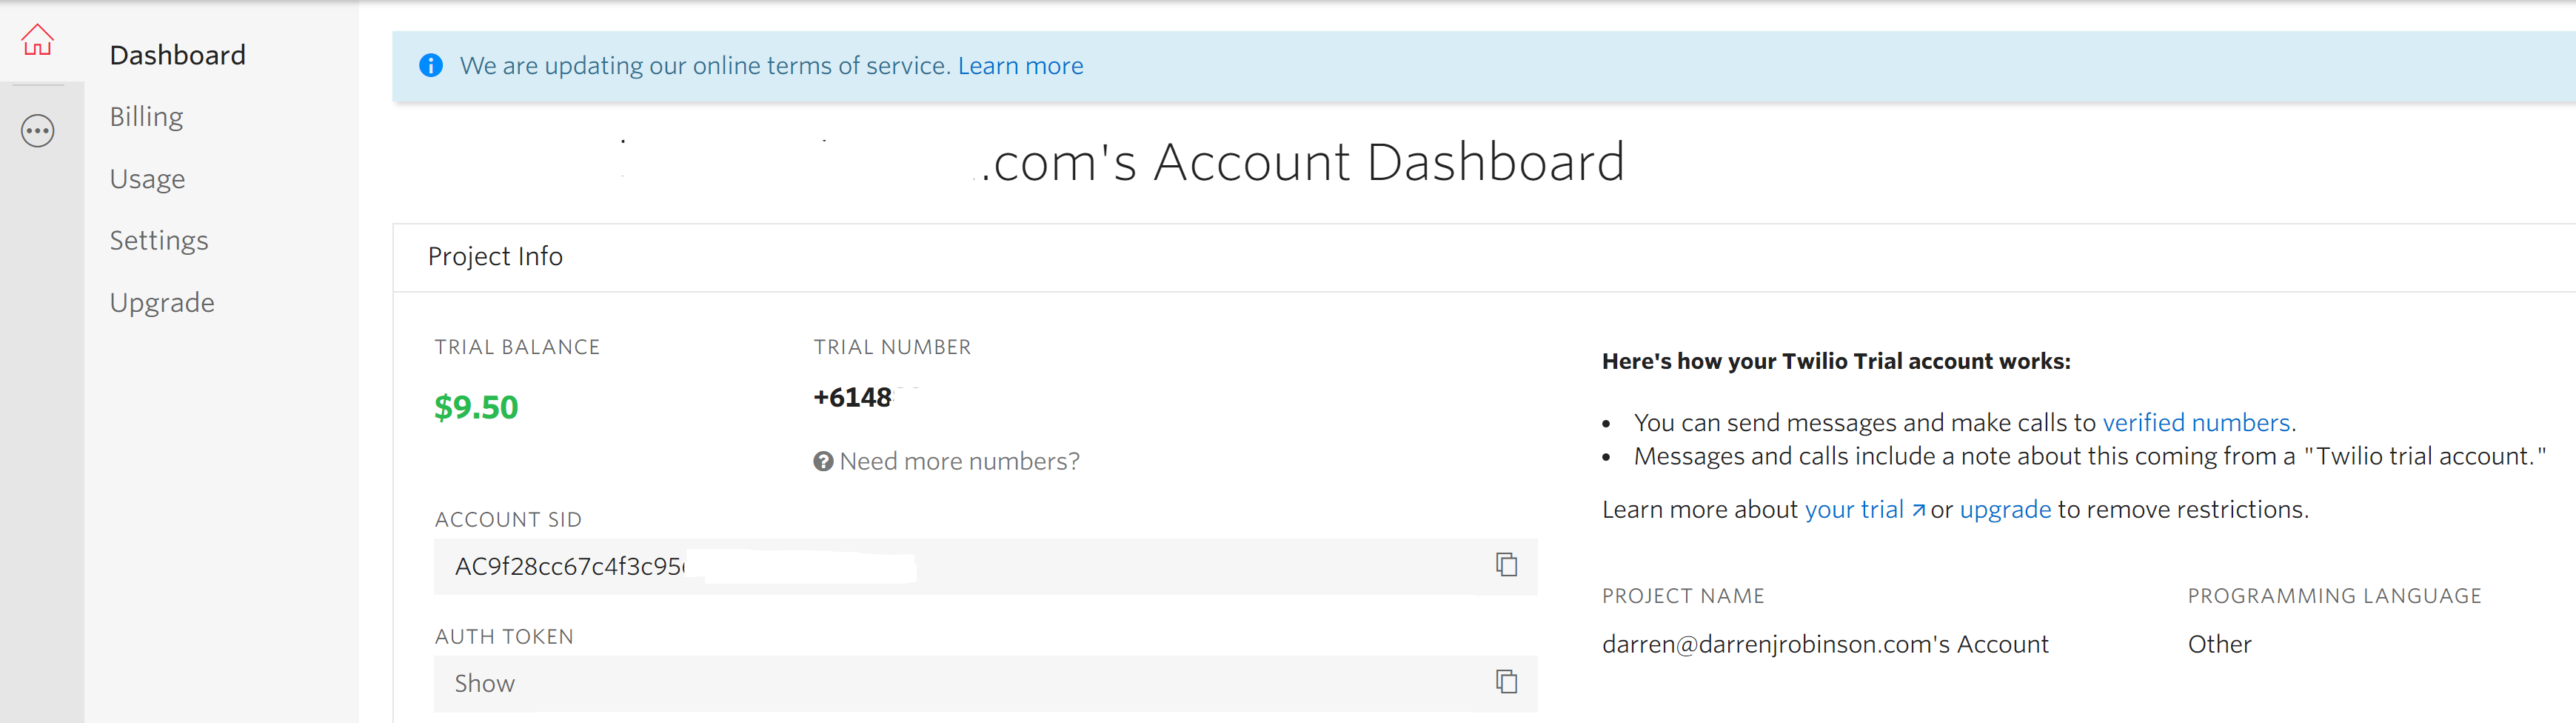 Trial Account Dashboard.PNG